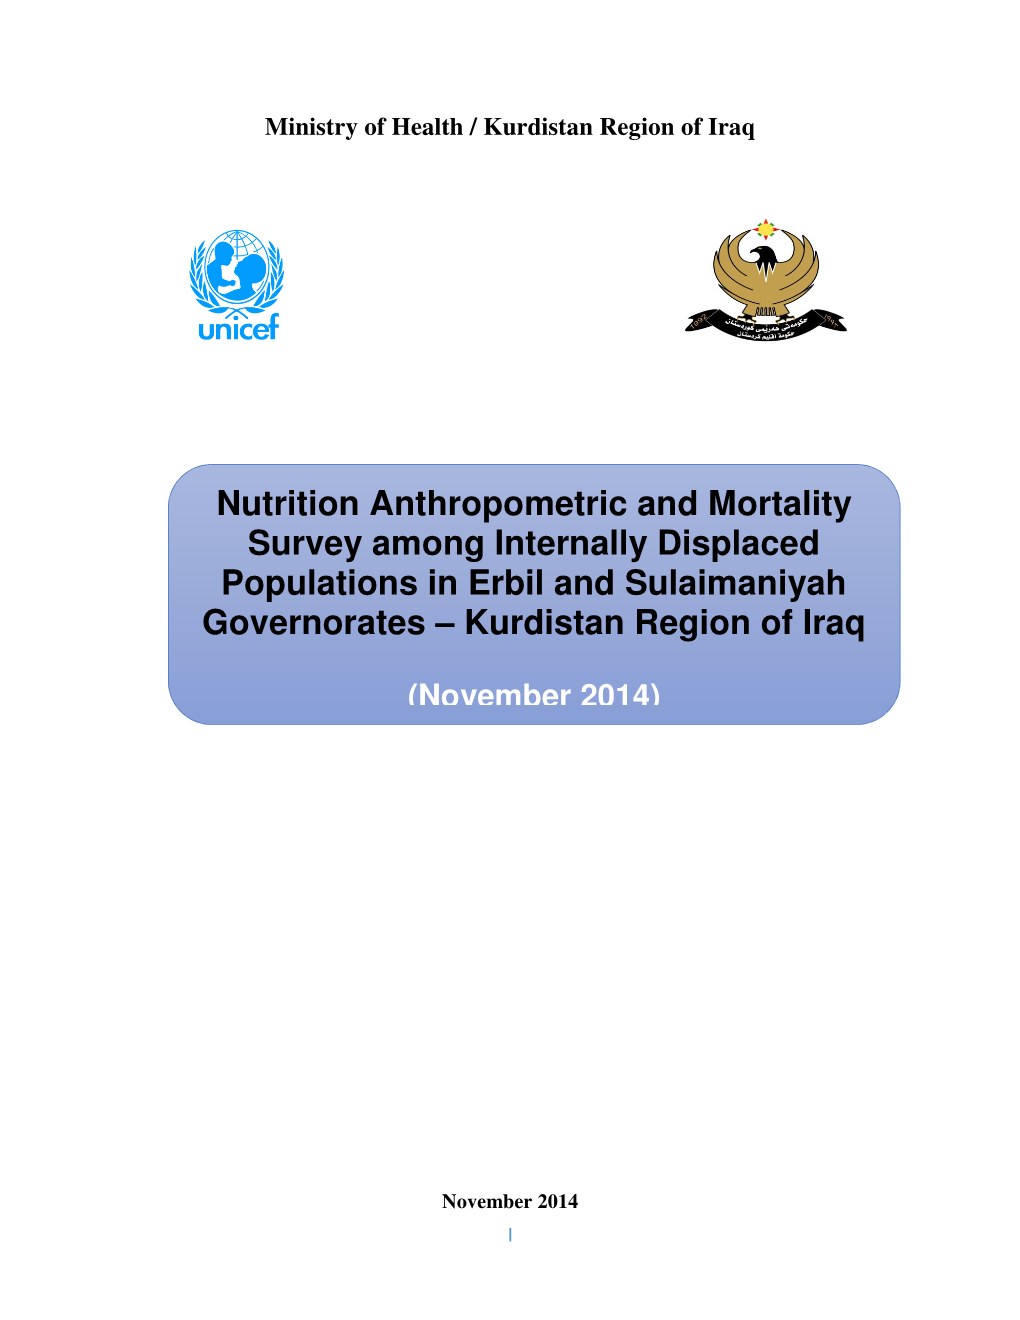 Nutrition Anthropometric and Mortality Survey Among Internally Displaced Populations in Erbil and Sulaimaniyah Governorates – Kurdistan Region of Iraq